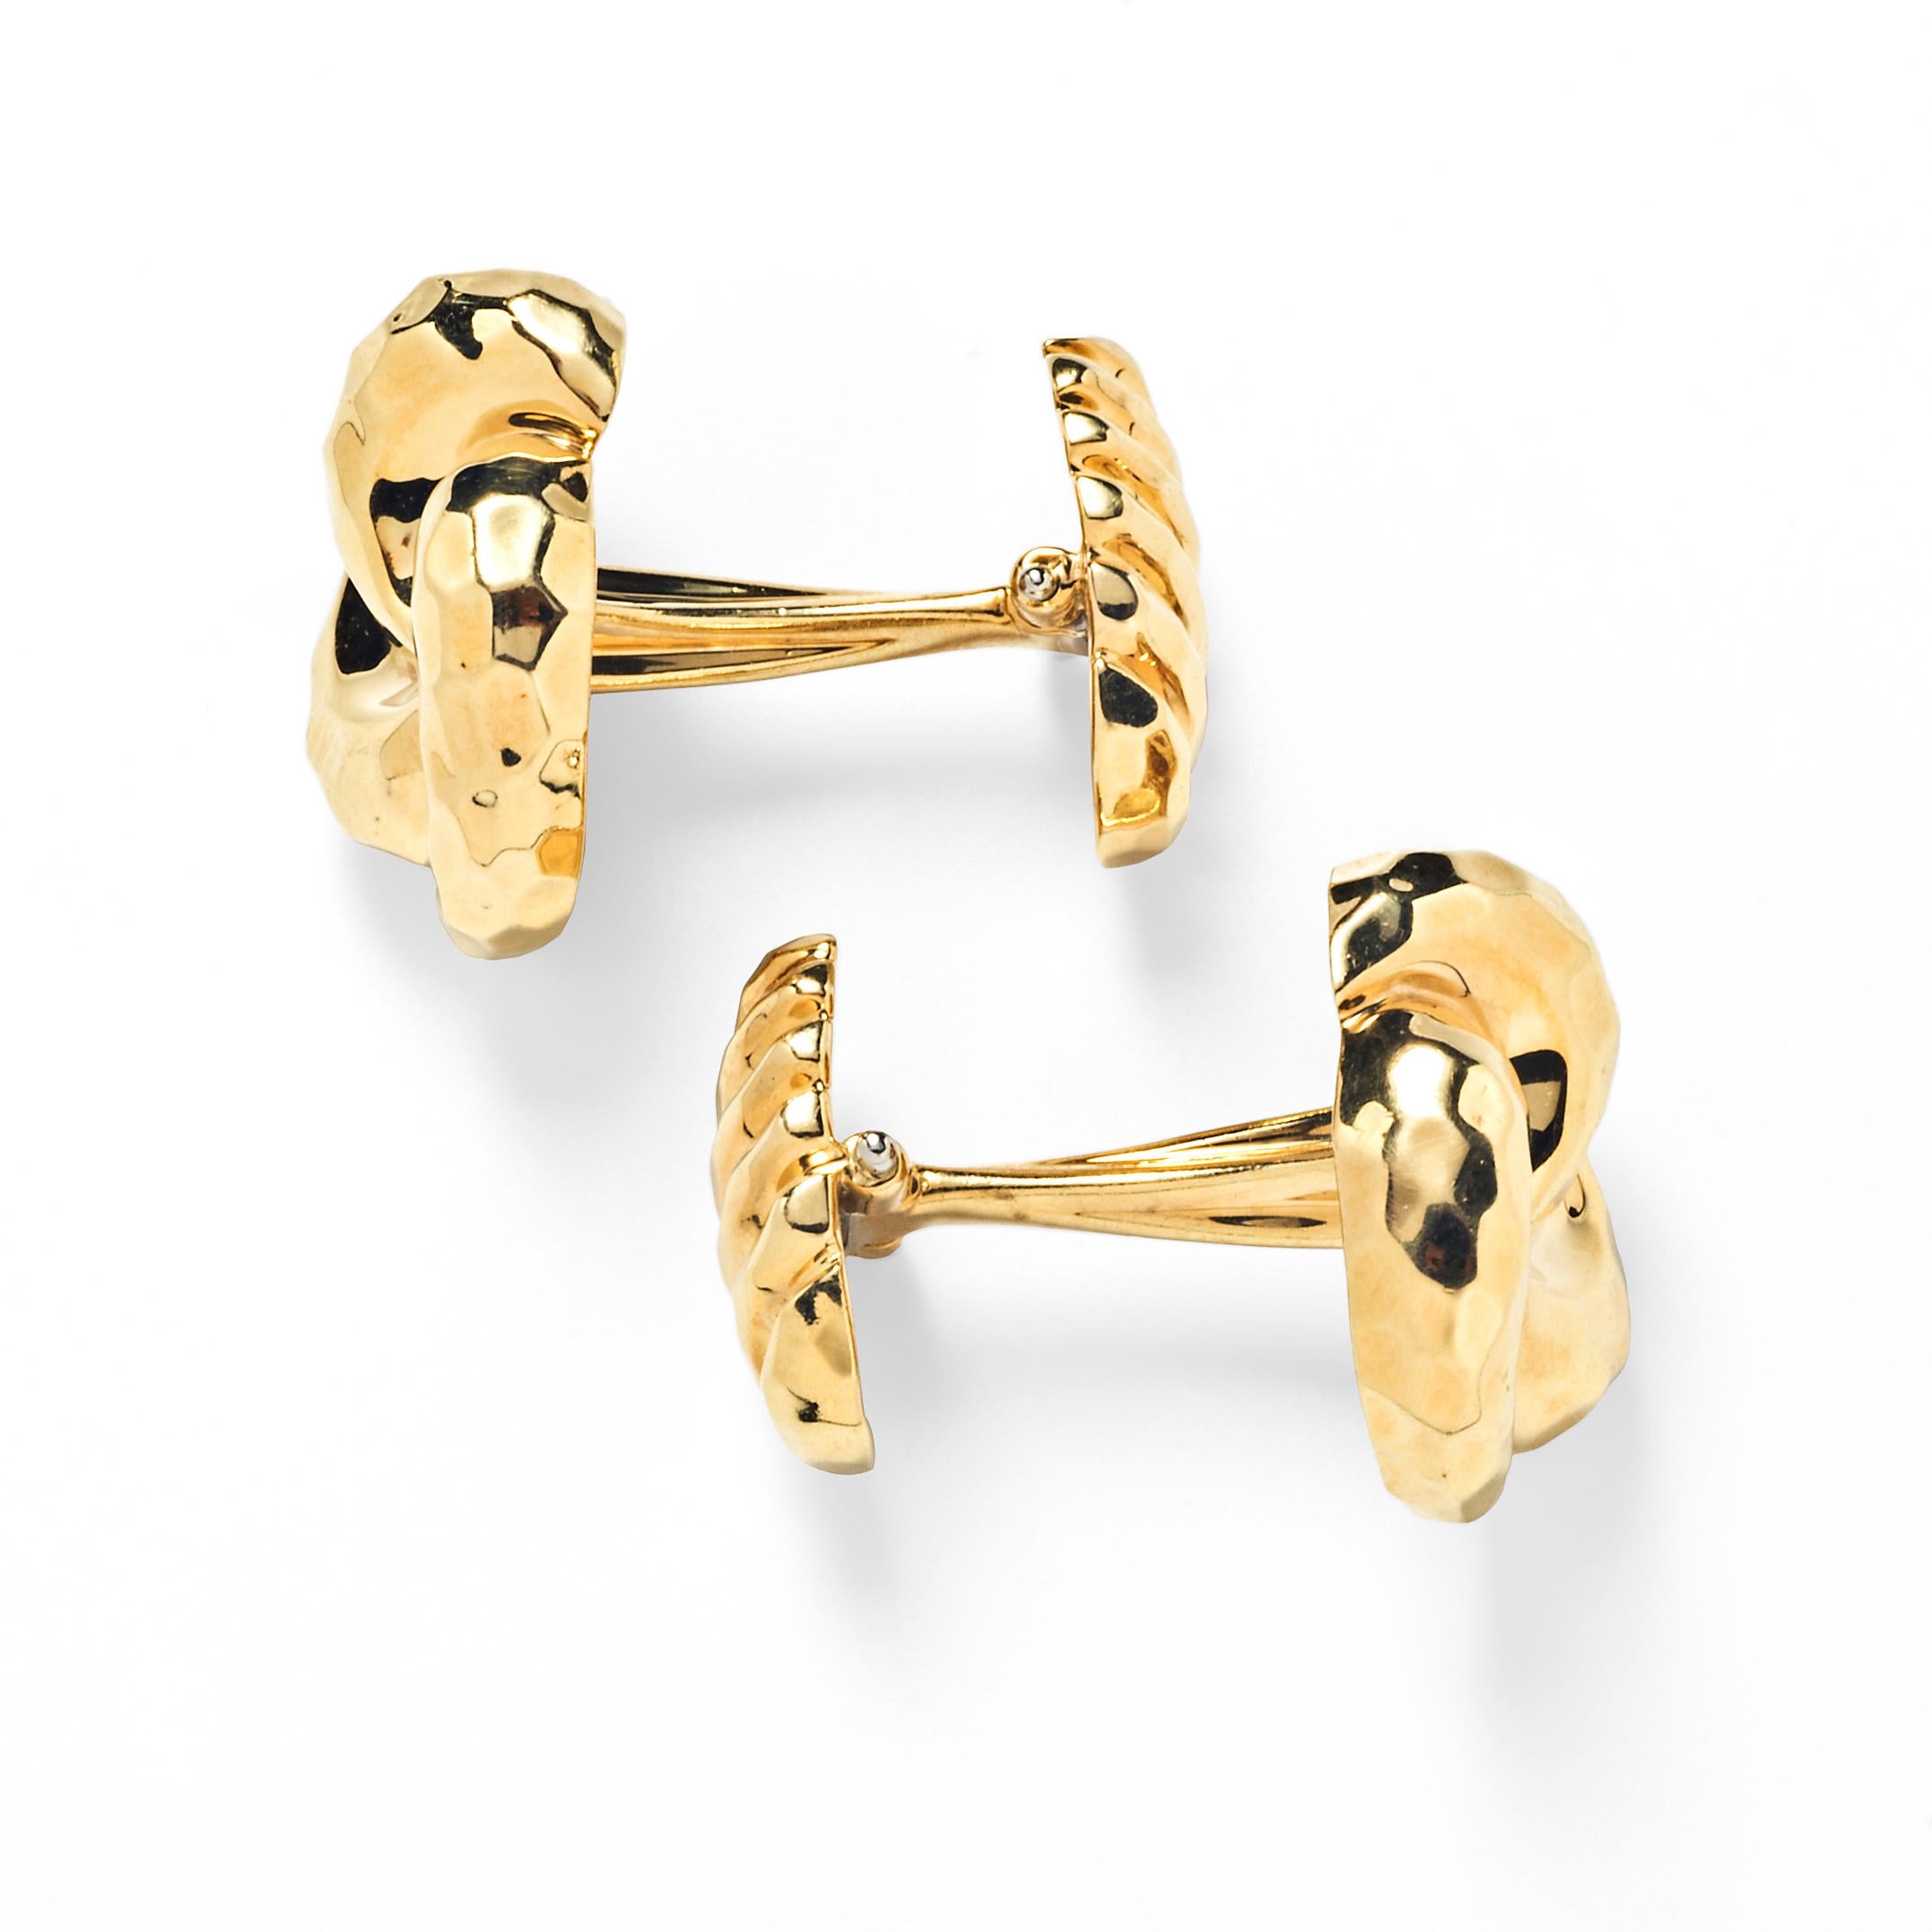 This substantial pair of Dunay 18K gold cufflinks features swirling hand-hammered knots finished with fluted gold whale backs.

18K yellow gold
Signed Dunay